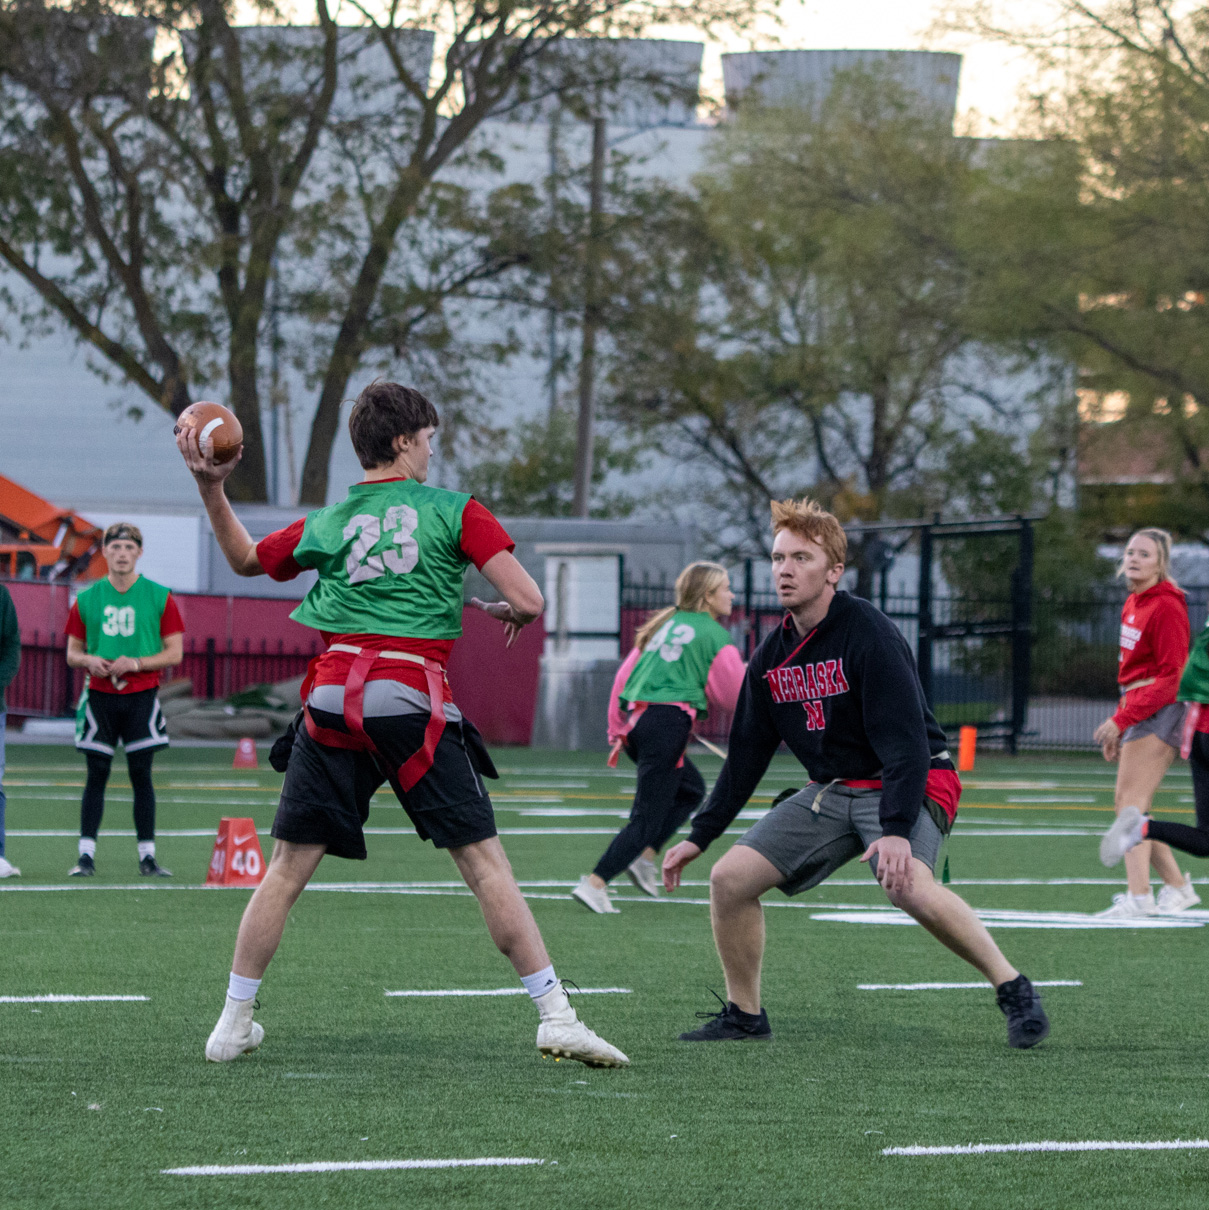 Thumbnail content for 'Flag Football'